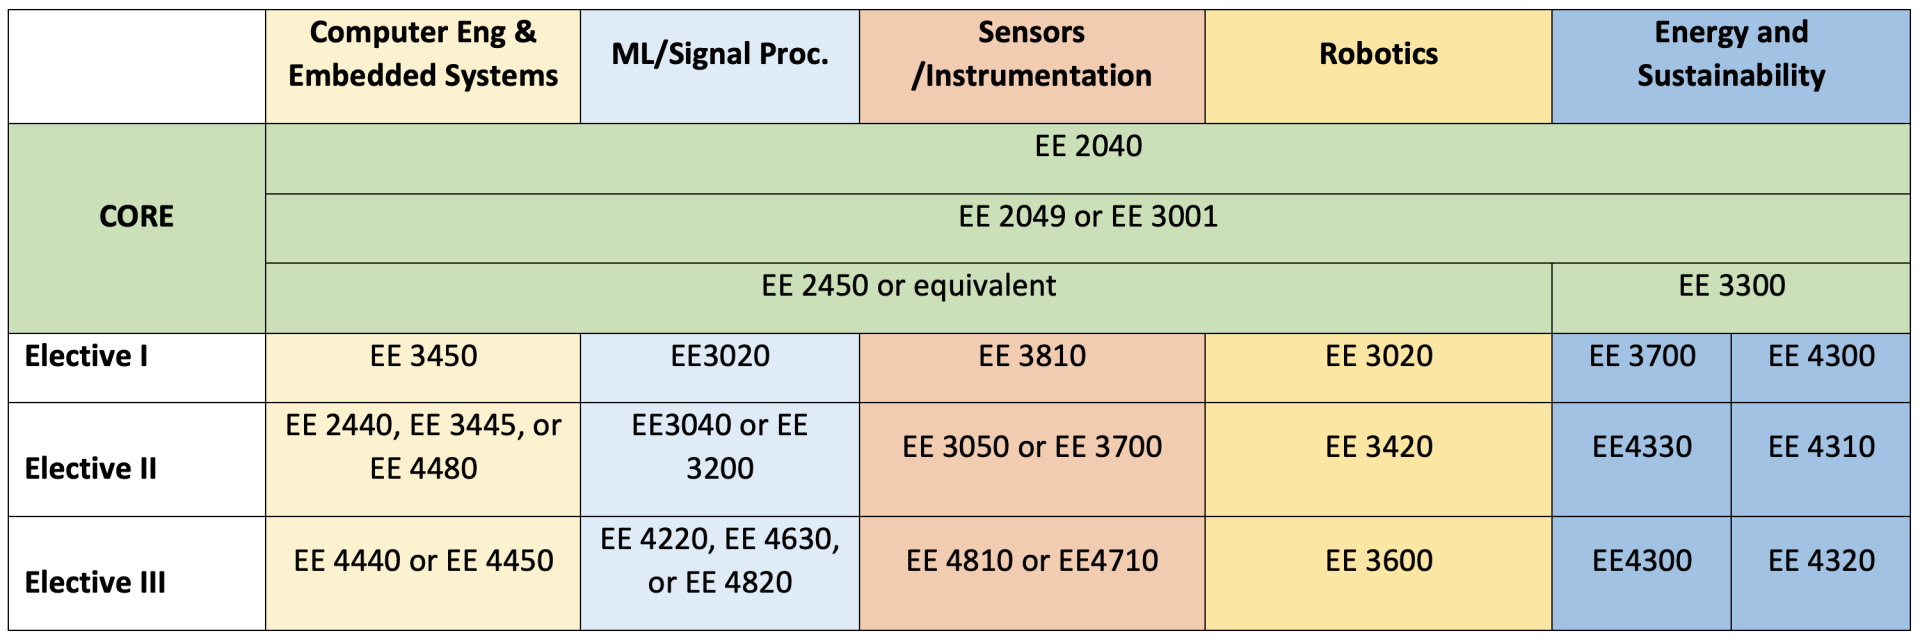 ece minor table showing requirements